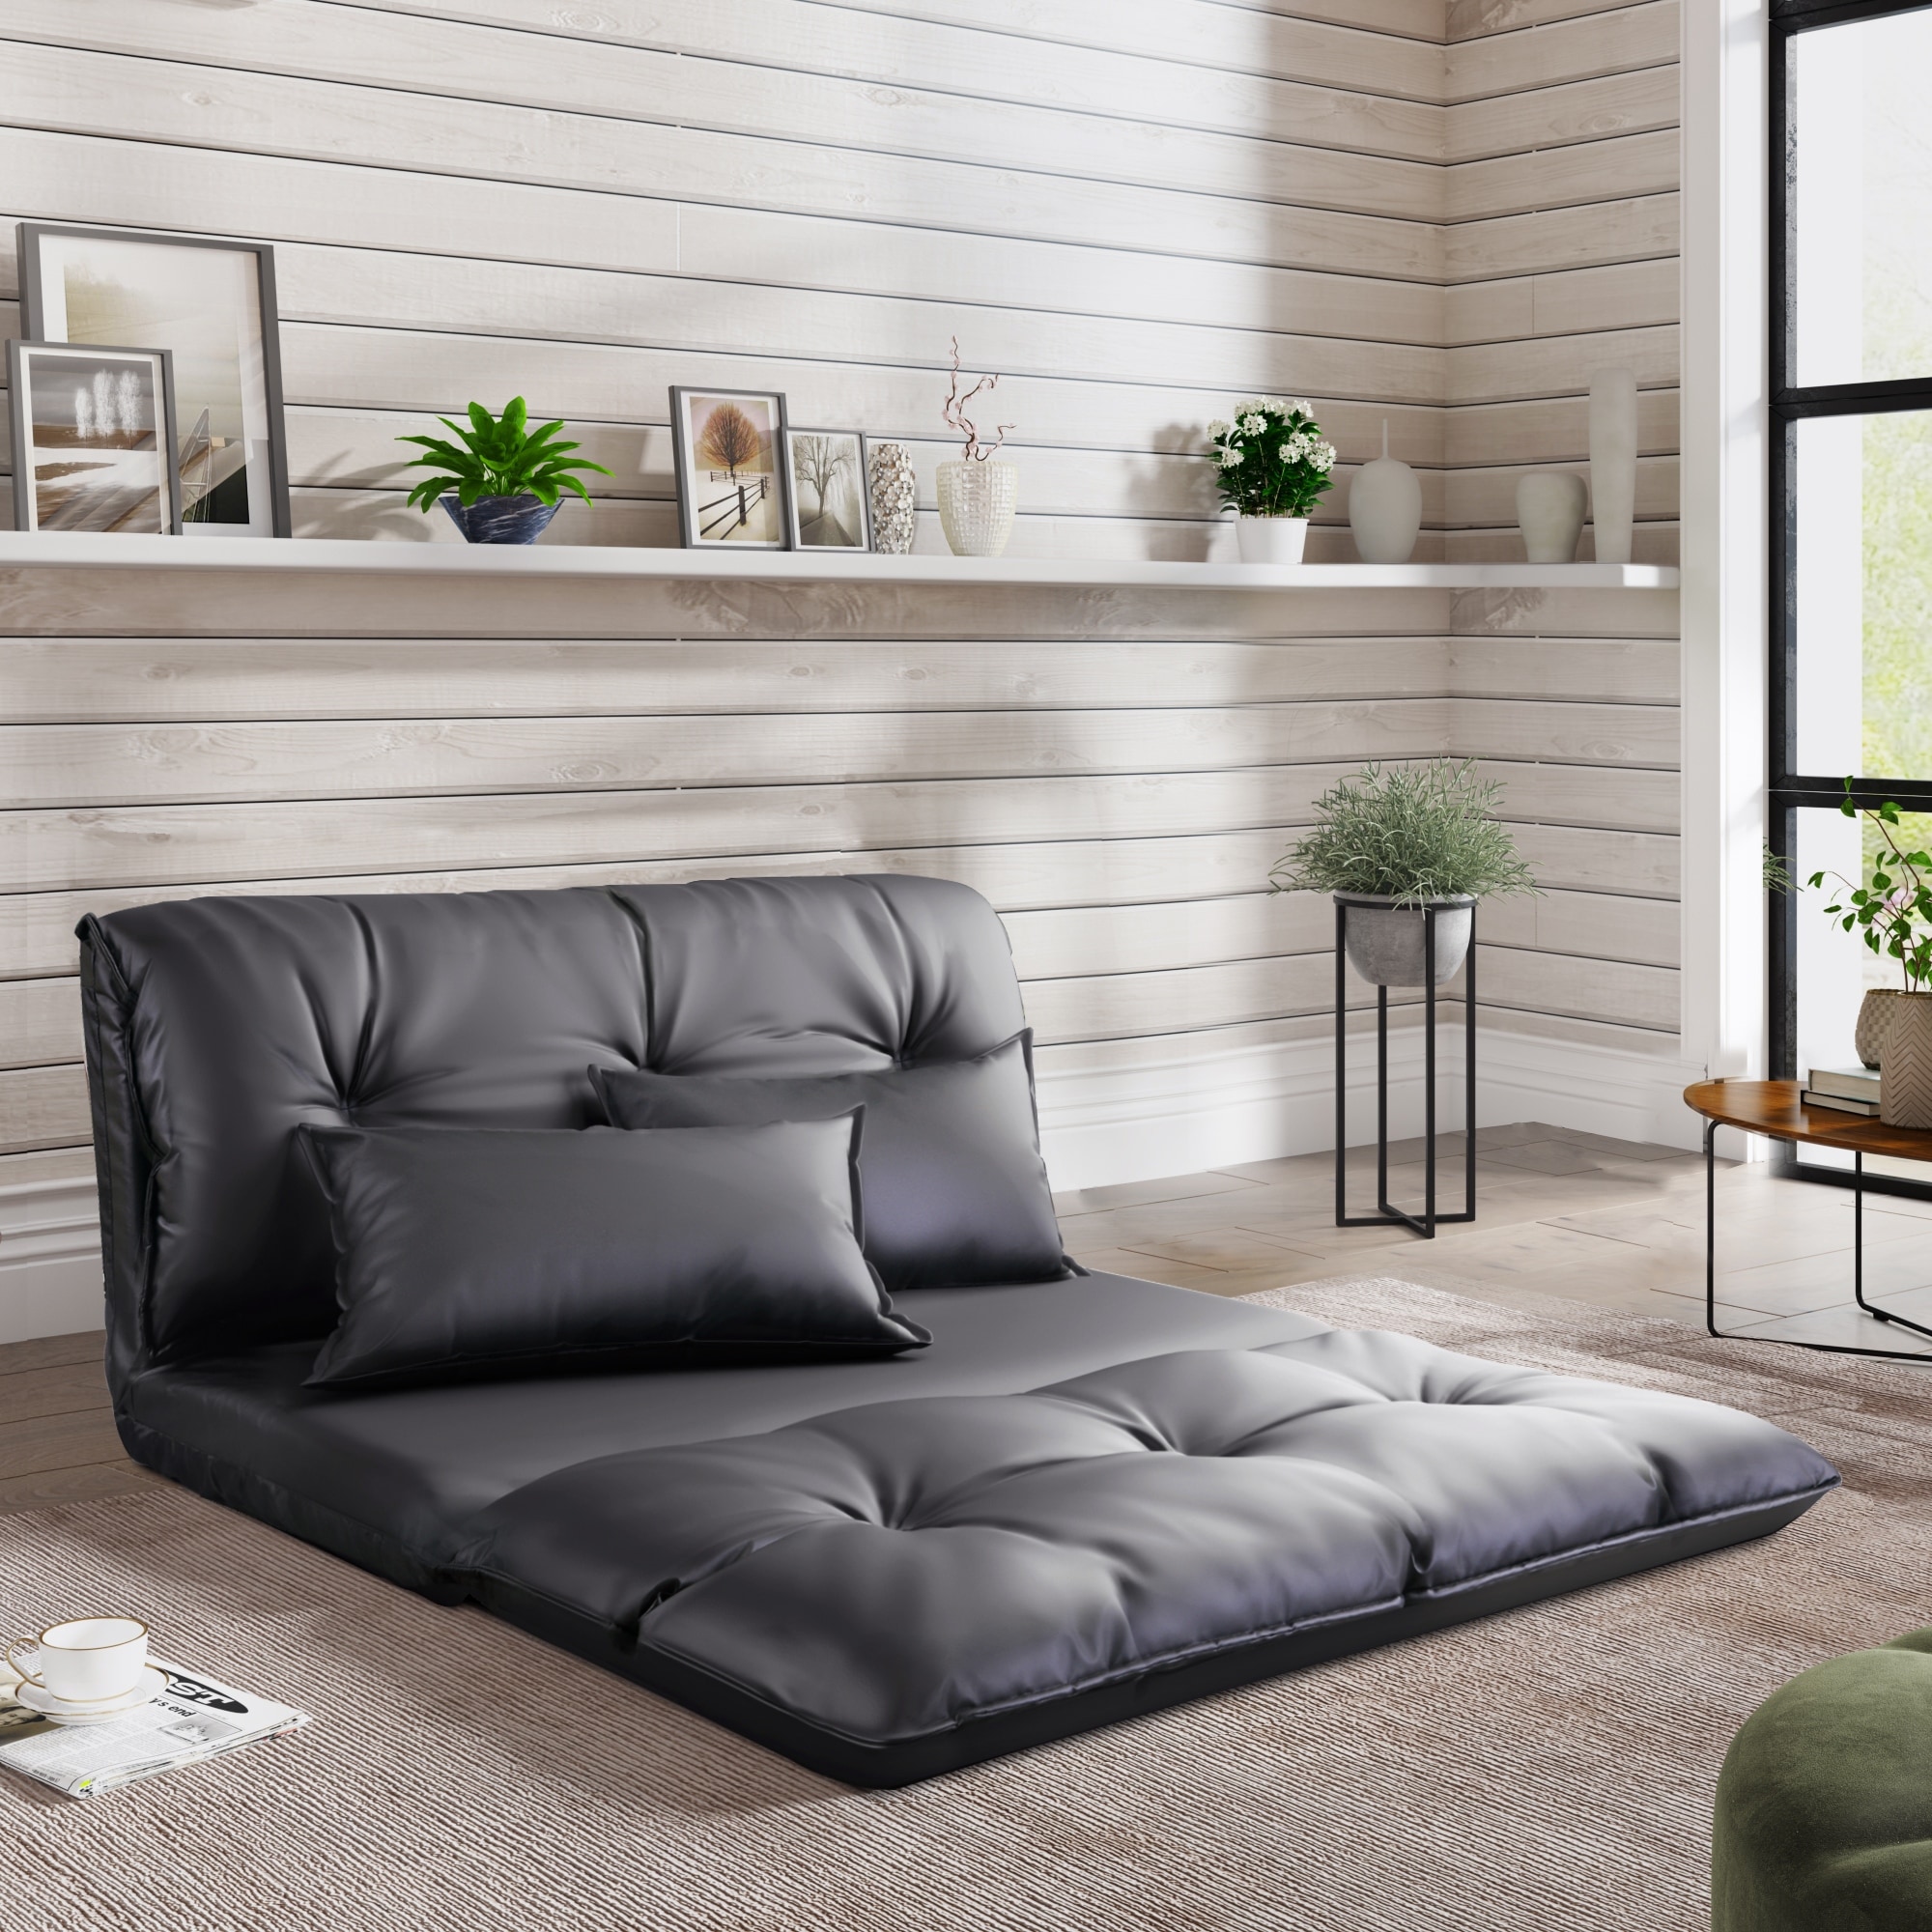 https://ak1.ostkcdn.com/images/products/is/images/direct/3cd002d44b0ce9ca17de0ec62d216763e0eb4016/PU-Leather-Floor-Chair-Adjustable-Sofa-Bed-Mattress-Lazy-Man-Couch.jpg